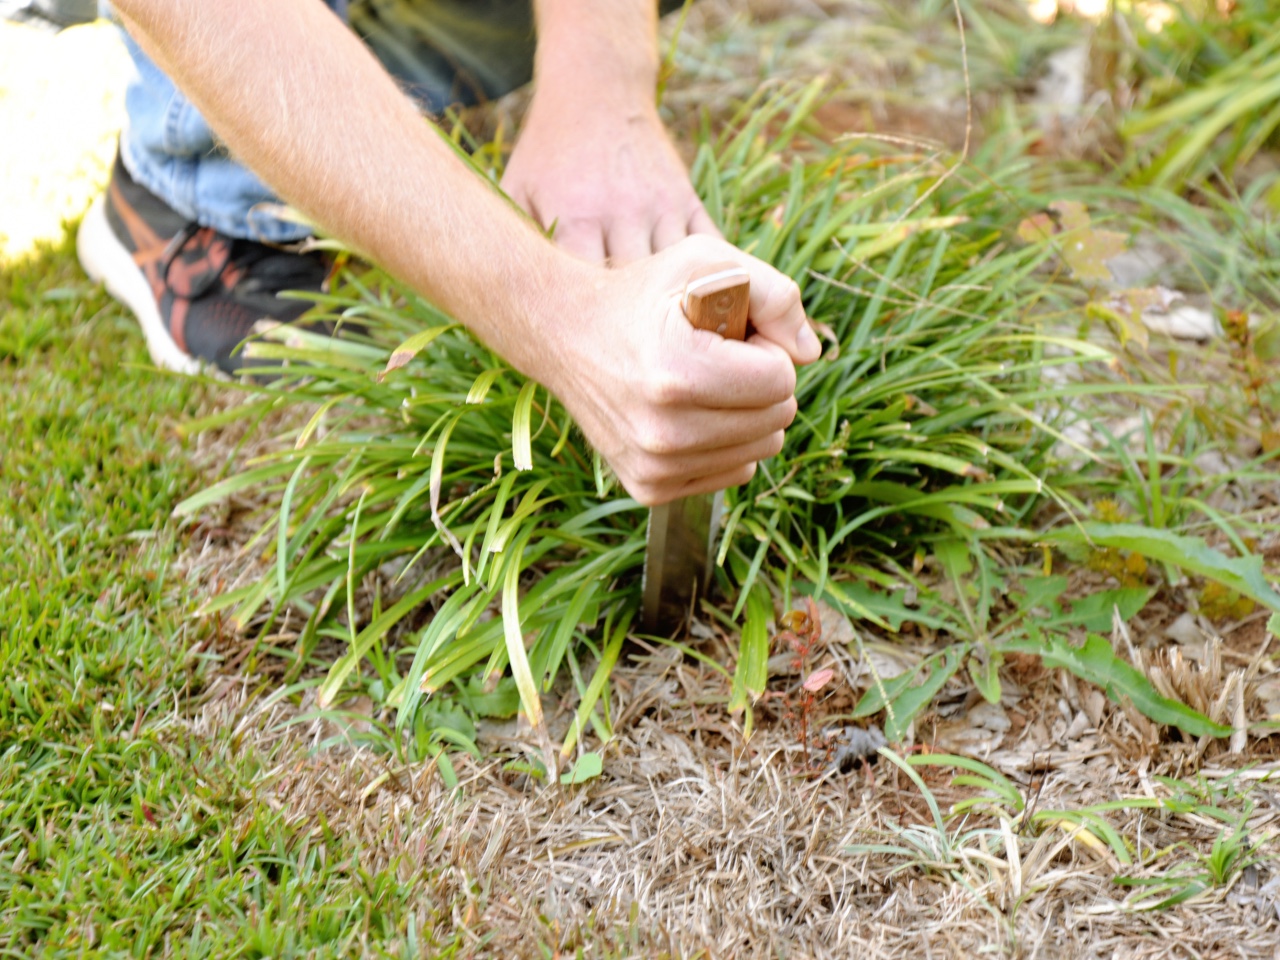 A person using the Truly Garden hori hori knife to dig a plant up from a yard.